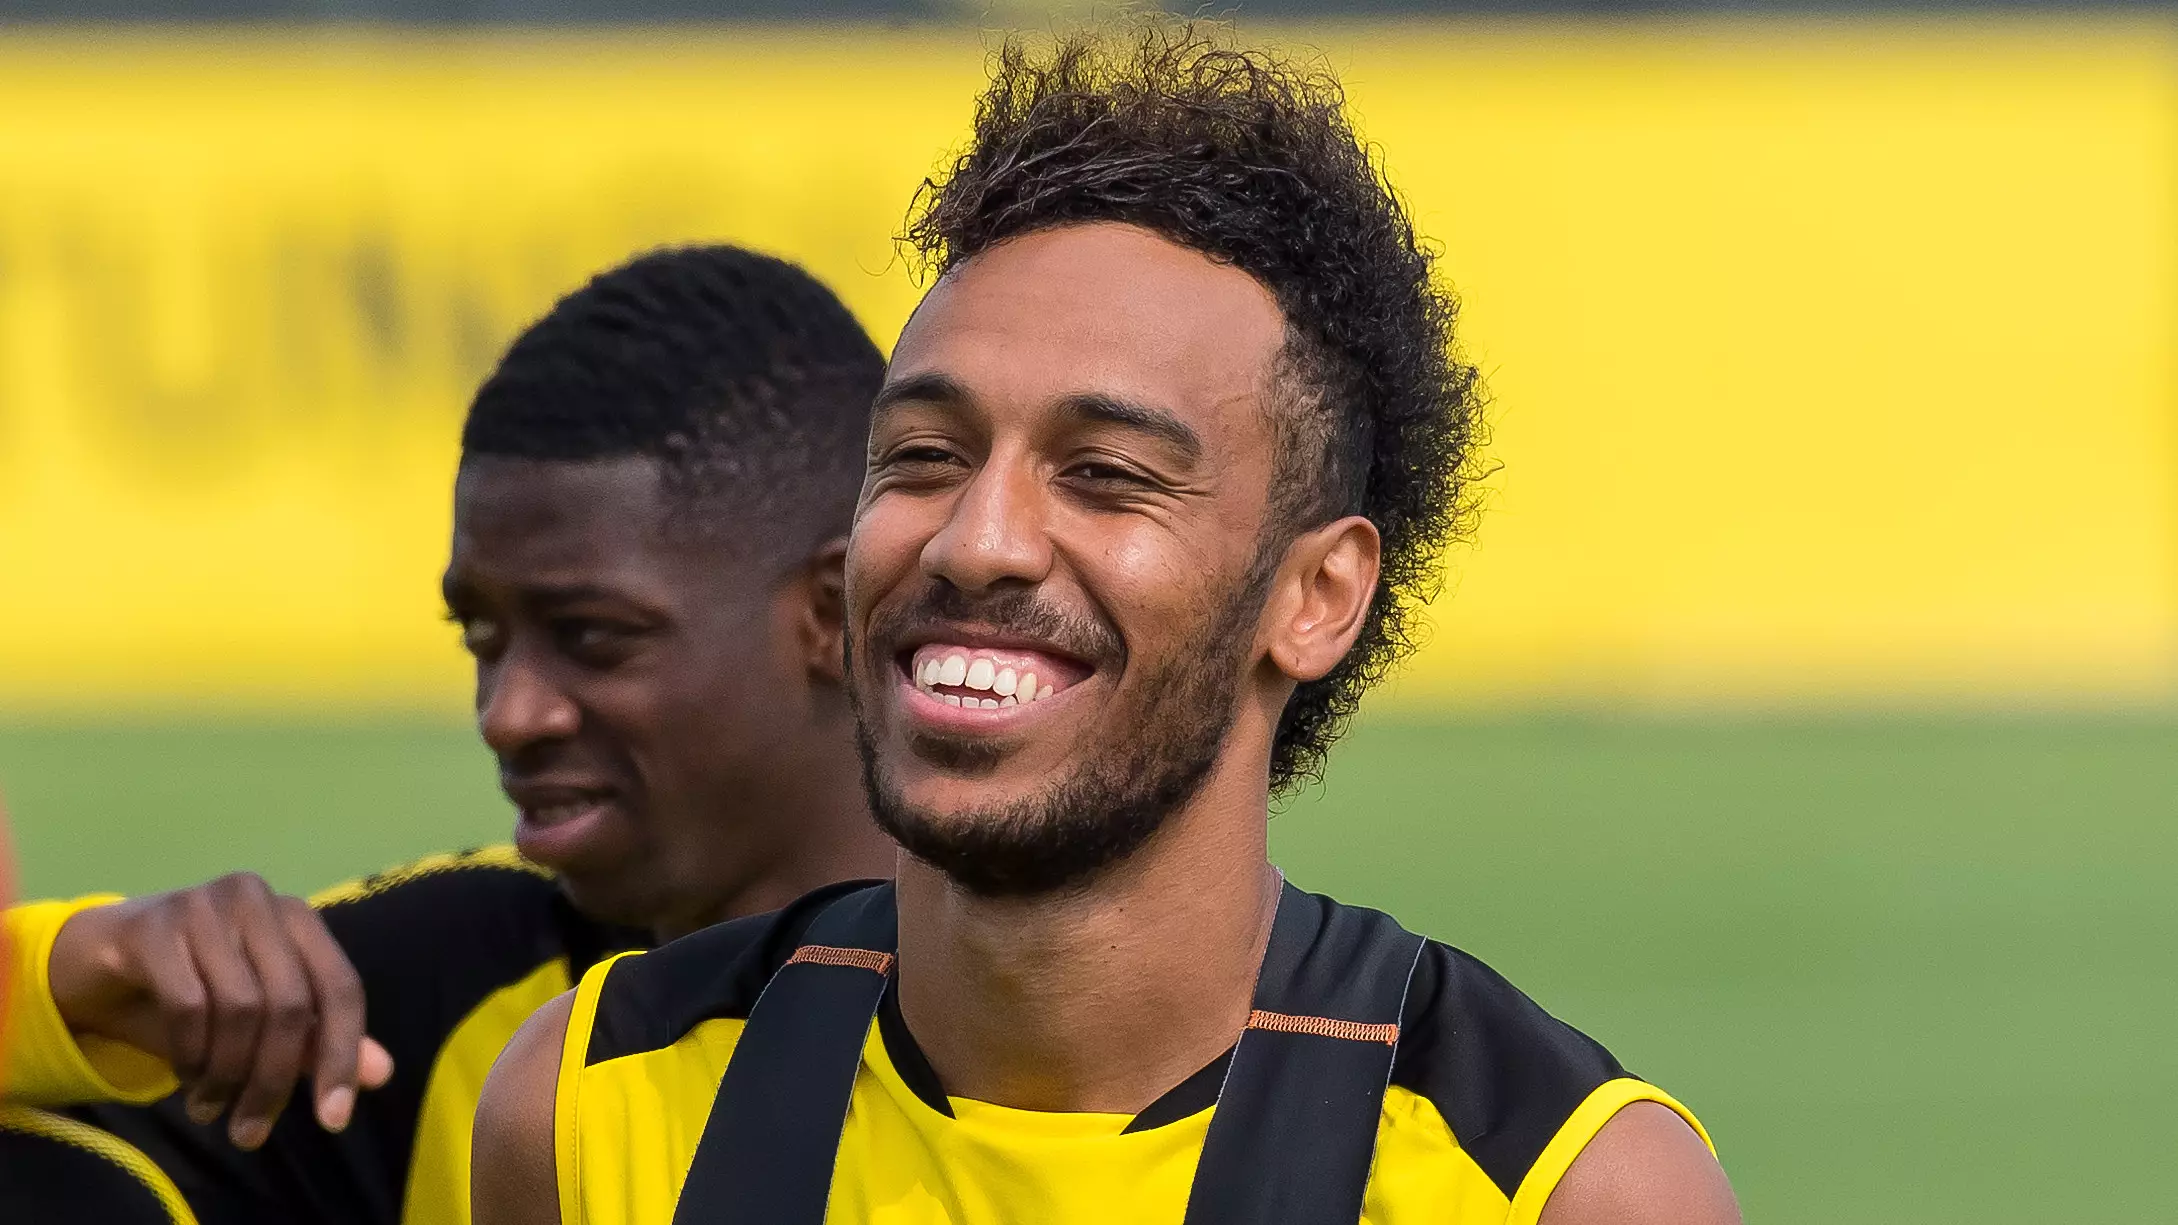 Pierre-Emerick Aubameyang's Next Move Is Already Decided